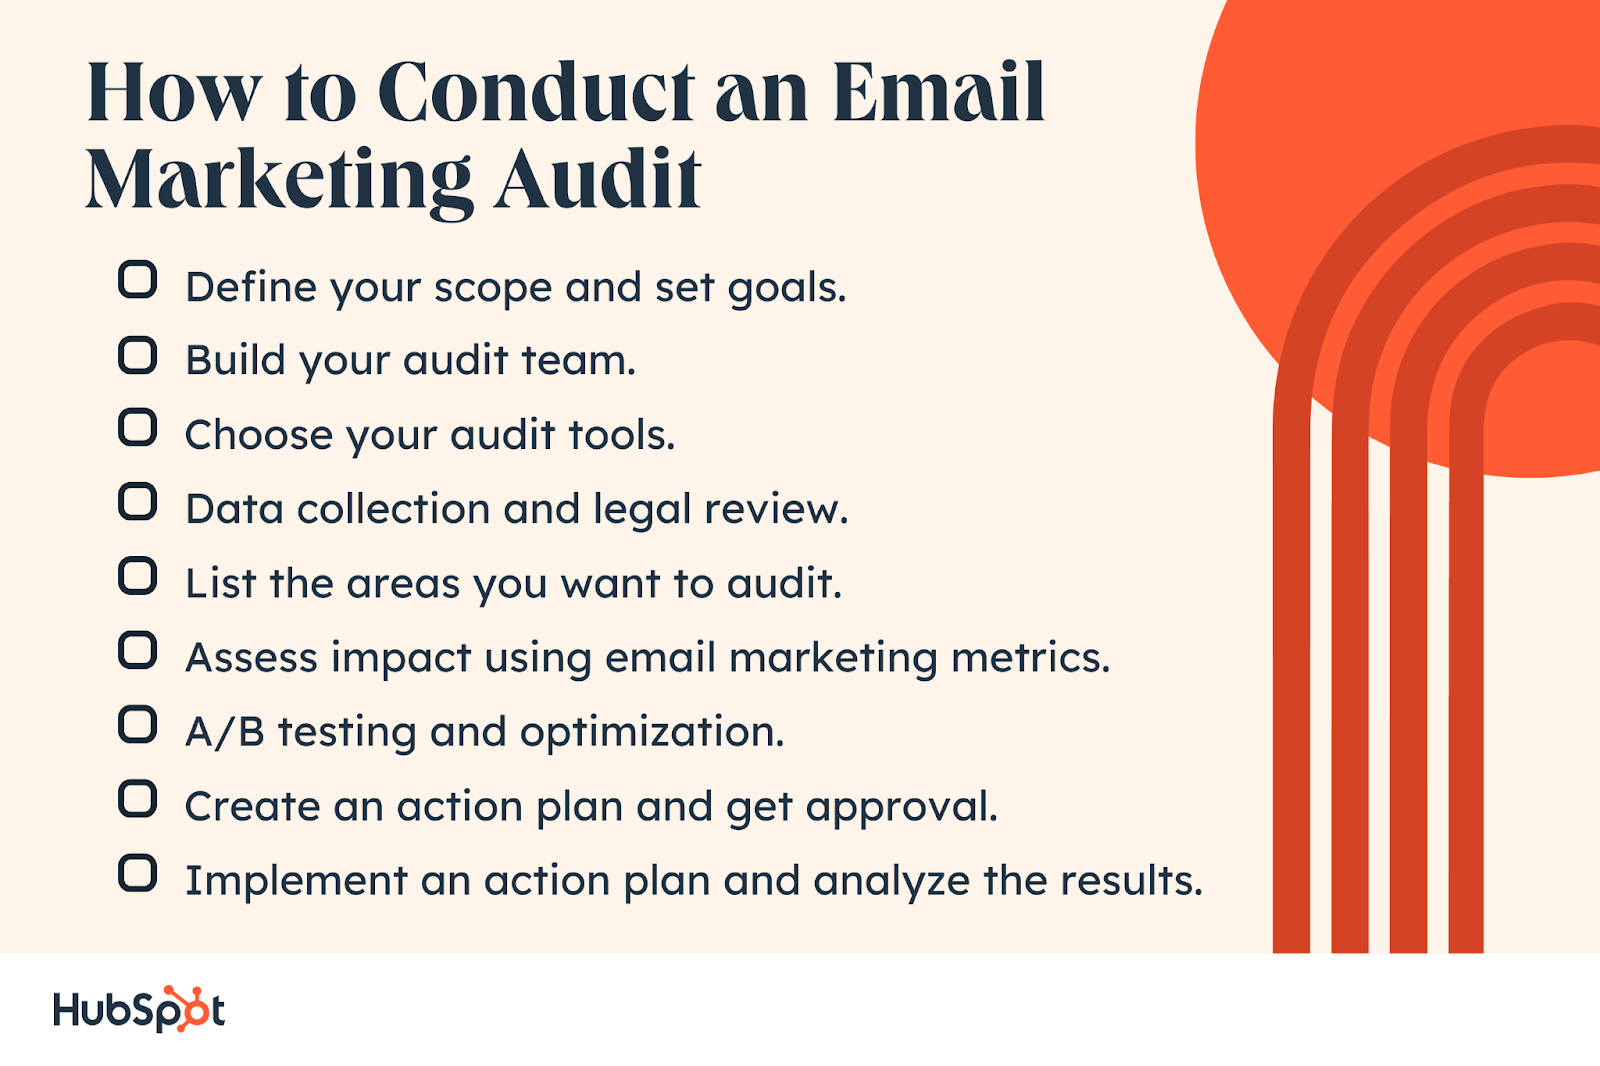 How to Conduct an Email Marketing Audit. Define your scope and set goals. Build your audit team. Choose your audit tools. Data collection and legal review. List the areas you want to audit. Assess impact using email marketing metrics. A/B testing and optimization. Create an action plan and get approval. Implement an action plan and analyze the results.